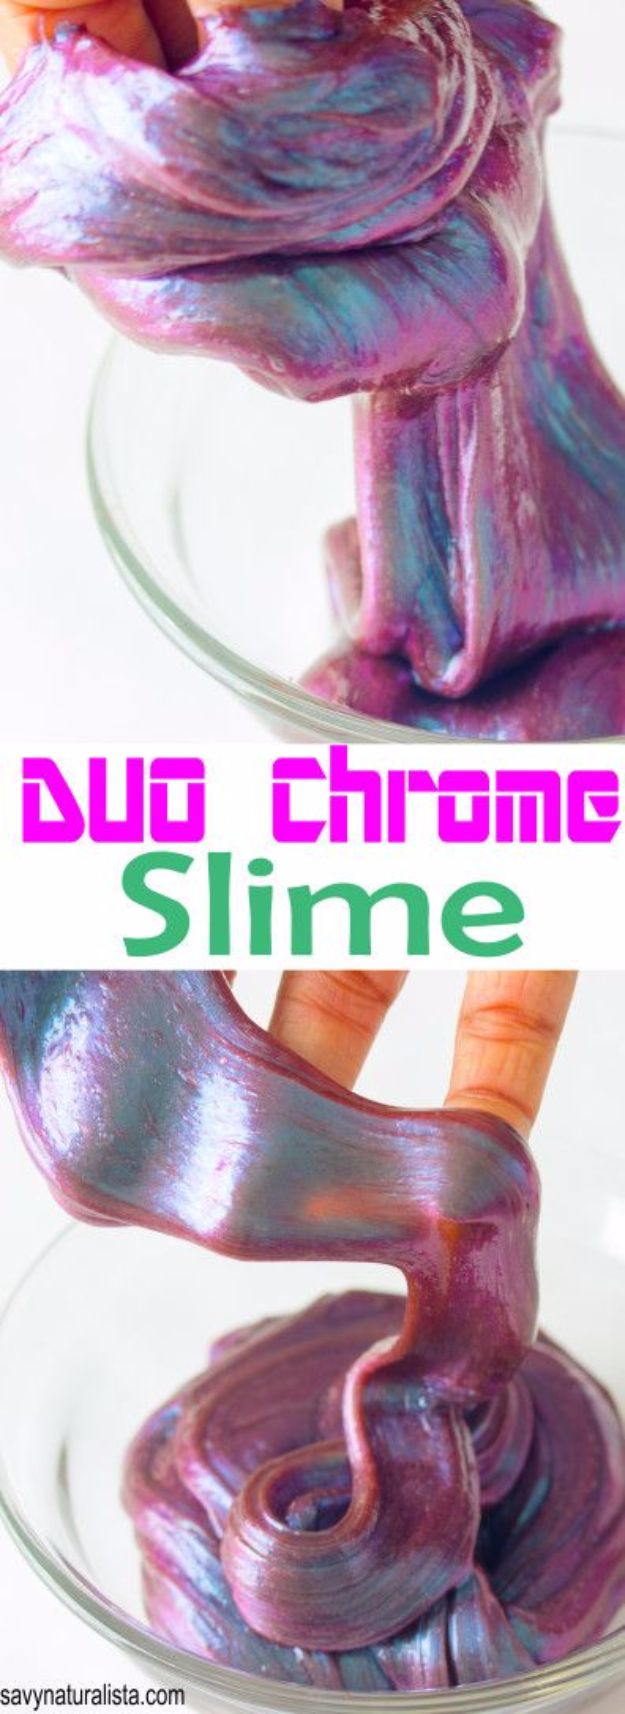 Best DIY Slime Recipes - Duo Chrome Slime - Cool and Easy Slime Recipe and Tutorials - Ideas Without Glue, Without Borax, For Kids, With Liquid Starch, Cornstarch and Laundry Detergent - How to Make Slime at Home - Fun Crafts and DIY Projects for Teens, Kids, Teenagers and Teens - Galaxy and Glitter Slime, Edible Slime, Rainbow Colored Slime, Shaving Cream recipes and more fun crafts and slimes #slimerecipes #slime #diyslime #teencrafts